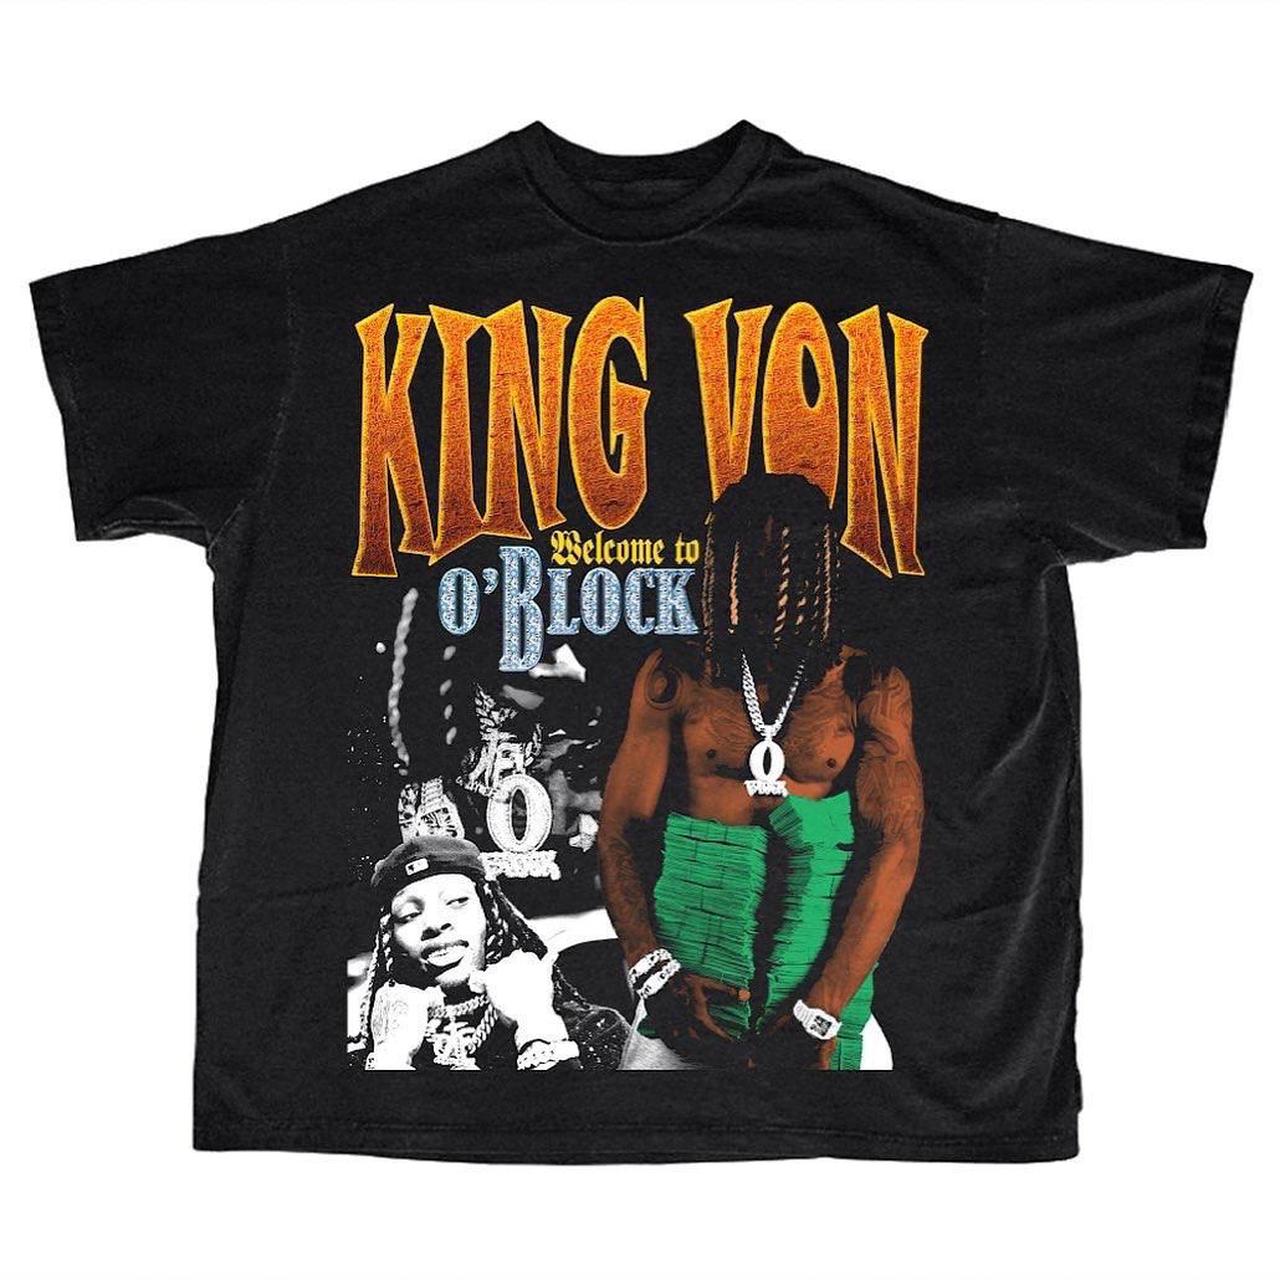 King Von Outfits Vintage T Shirt for Today 